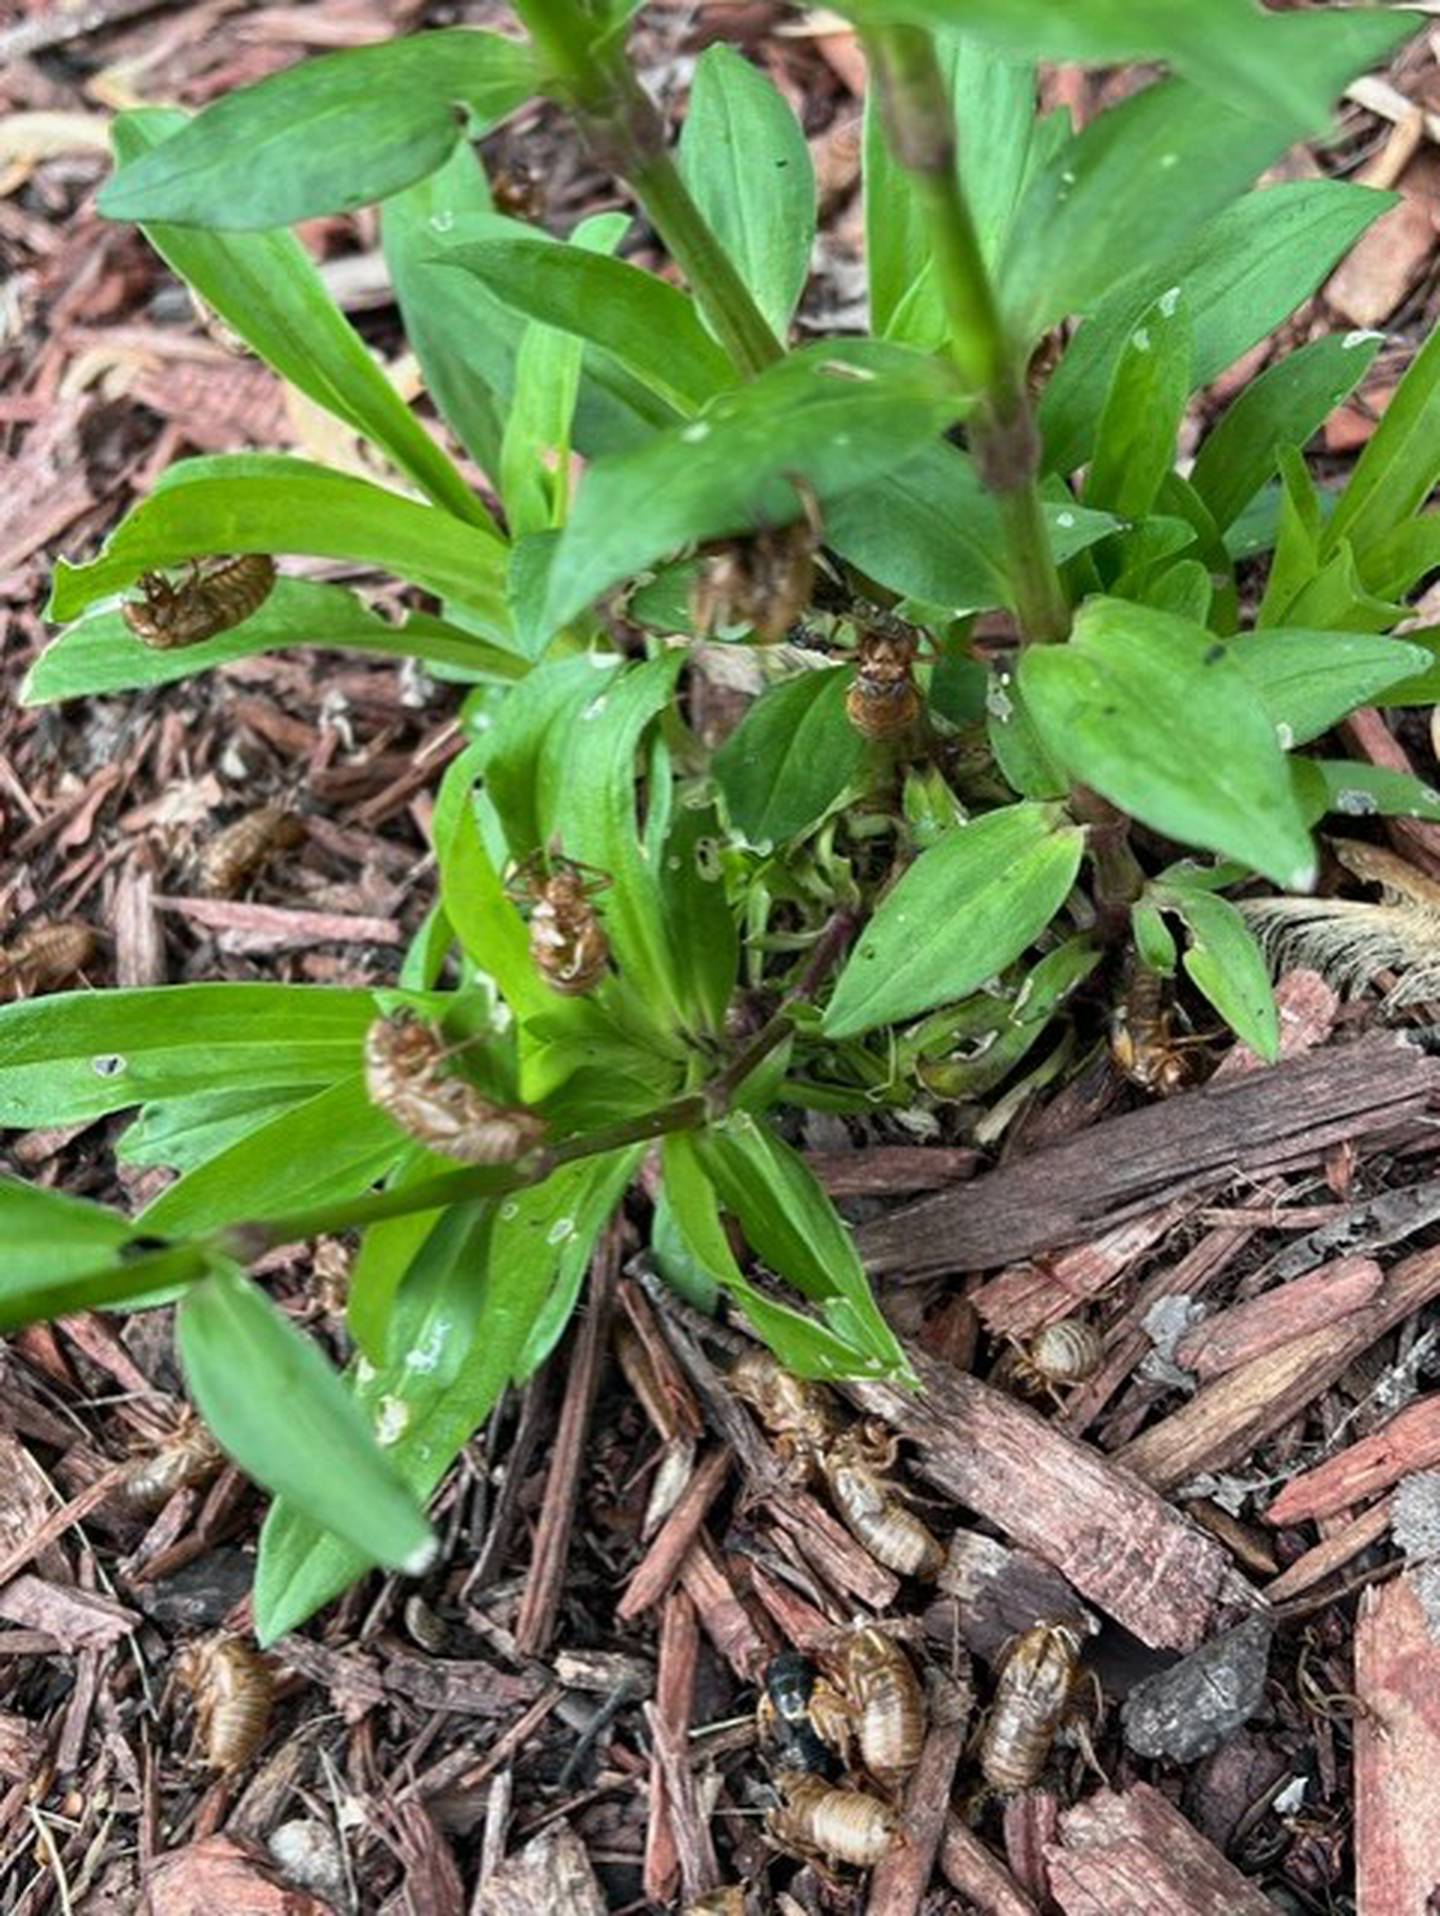 Master gardener Jean Kadar of New Lenox found these cicadas in her garden.Nancy Kuhajda, program coordinator, the University of Illinois Extension office in Will County, said the ground temperature needs to be 64 degrees for cicadas to emerge.